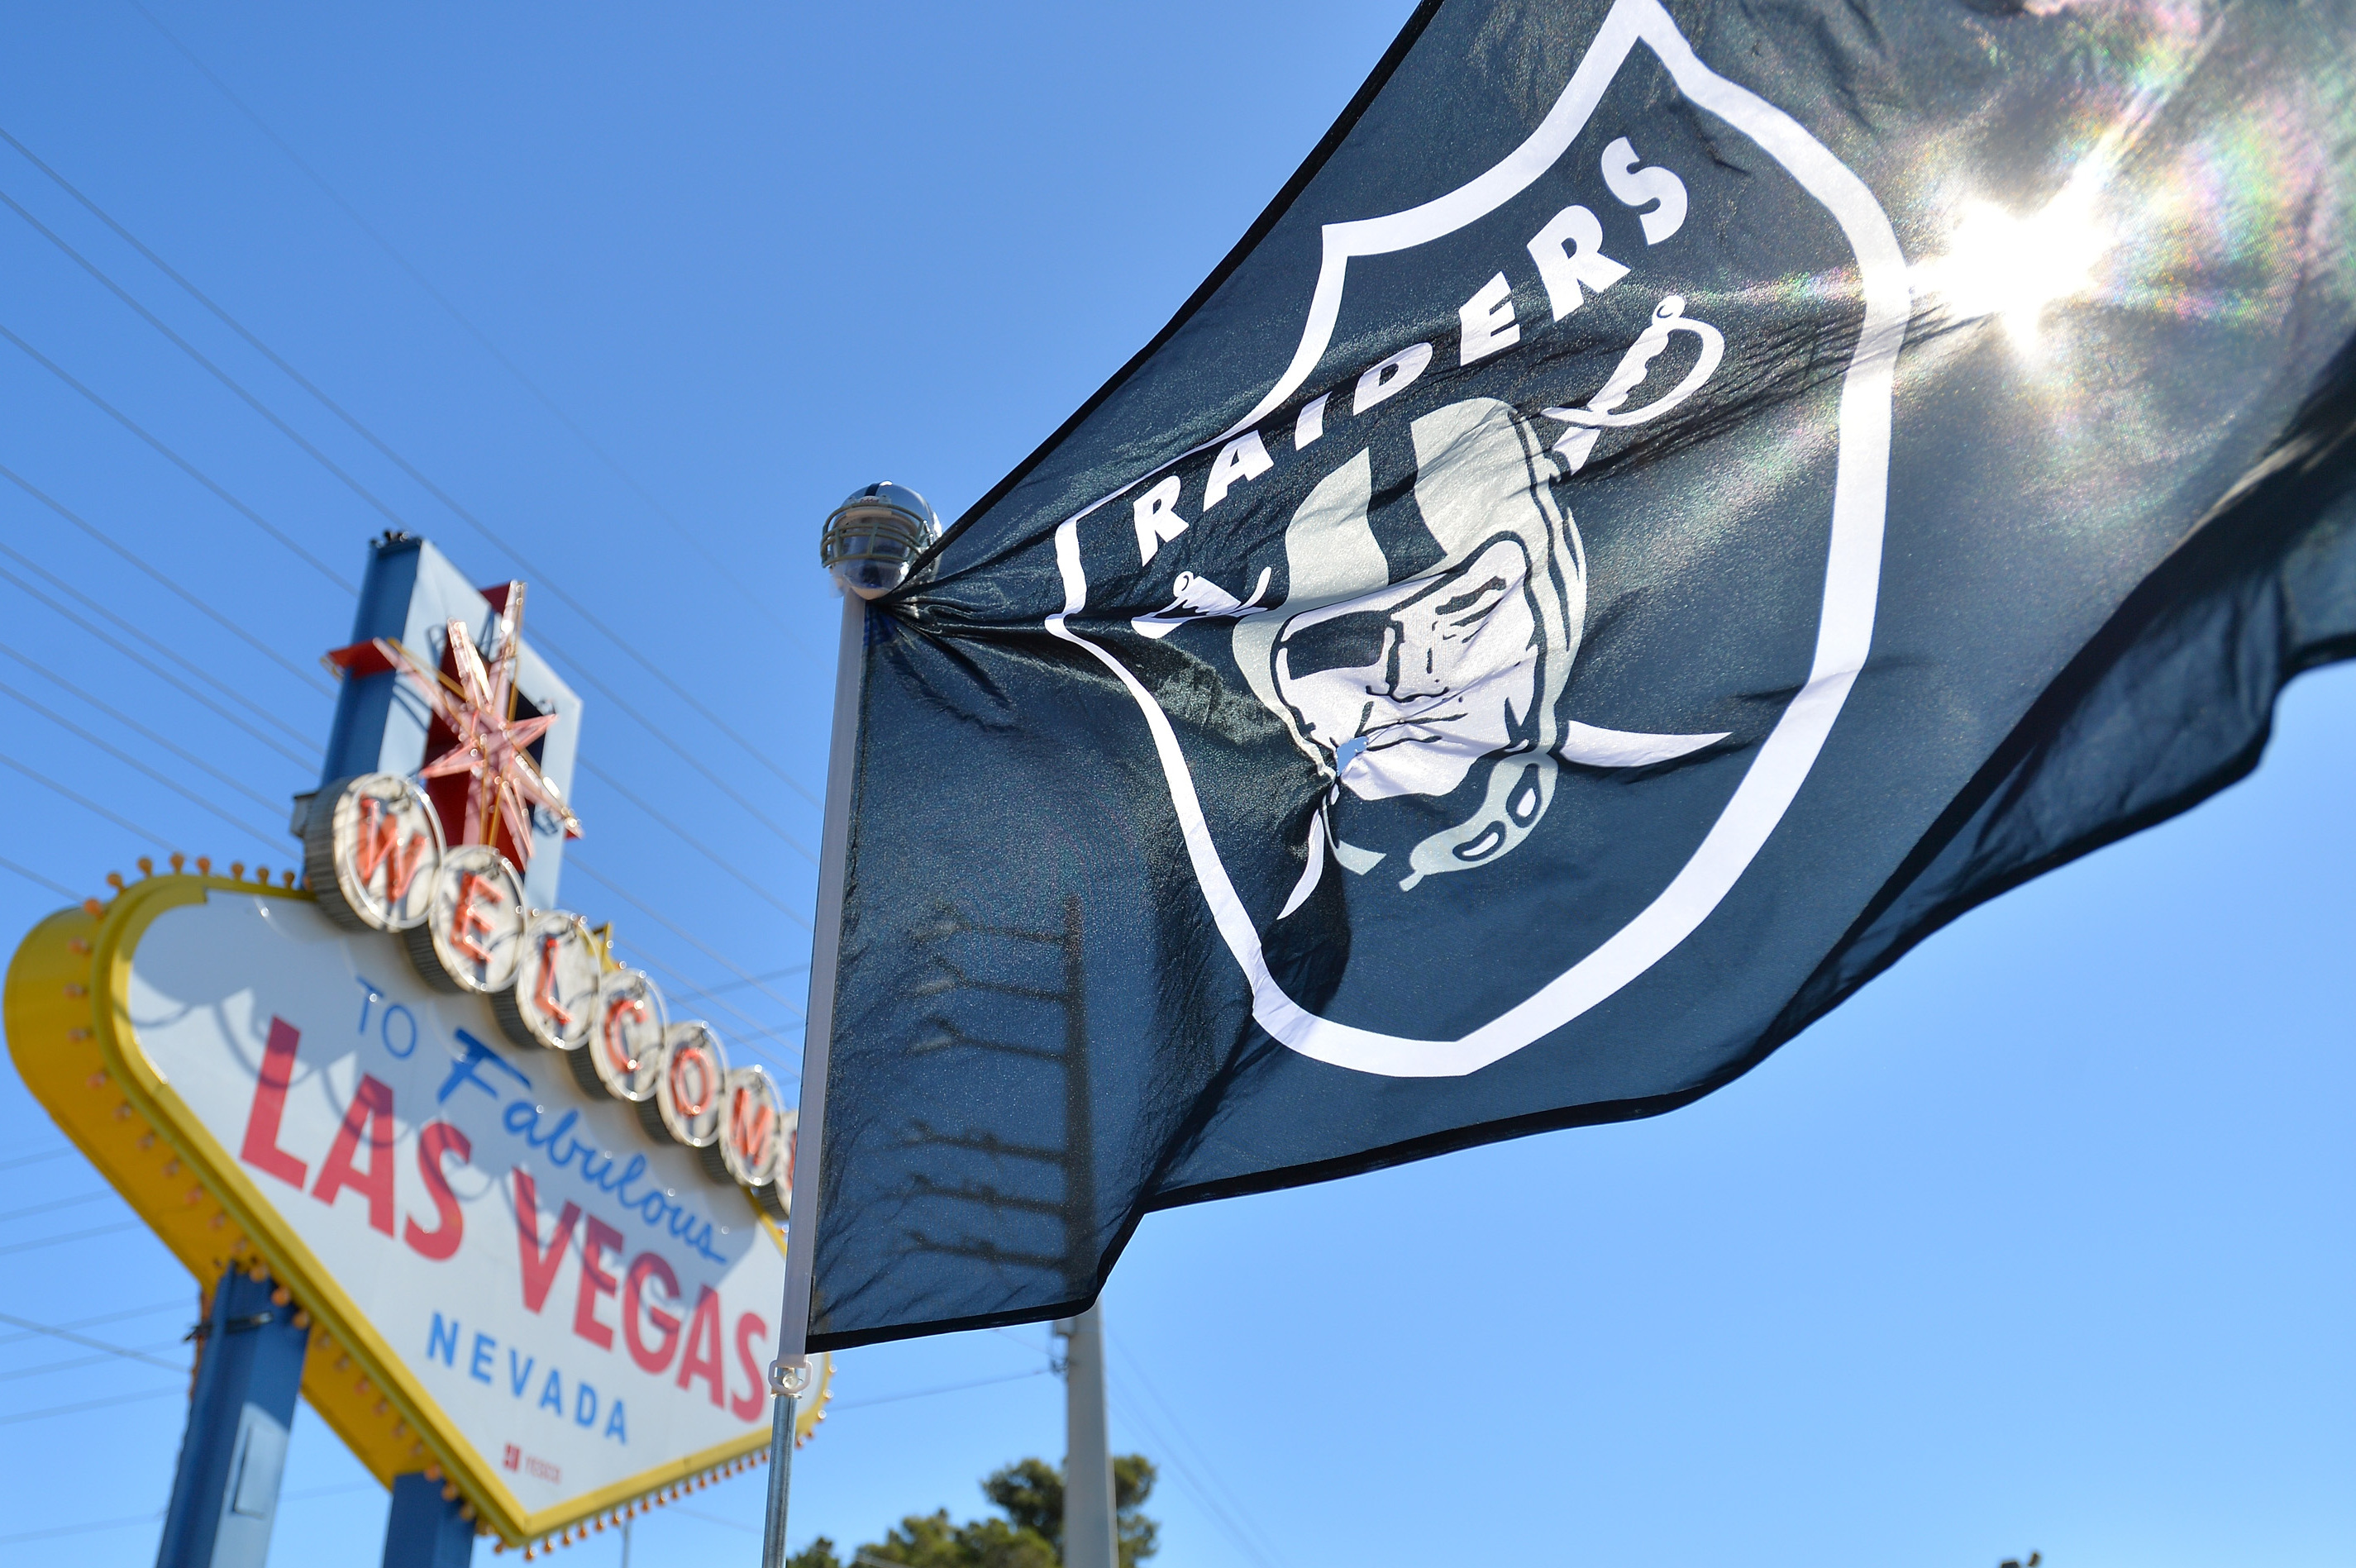 Raiders' Stadium Board Meeting Flooded with Job Applicants After